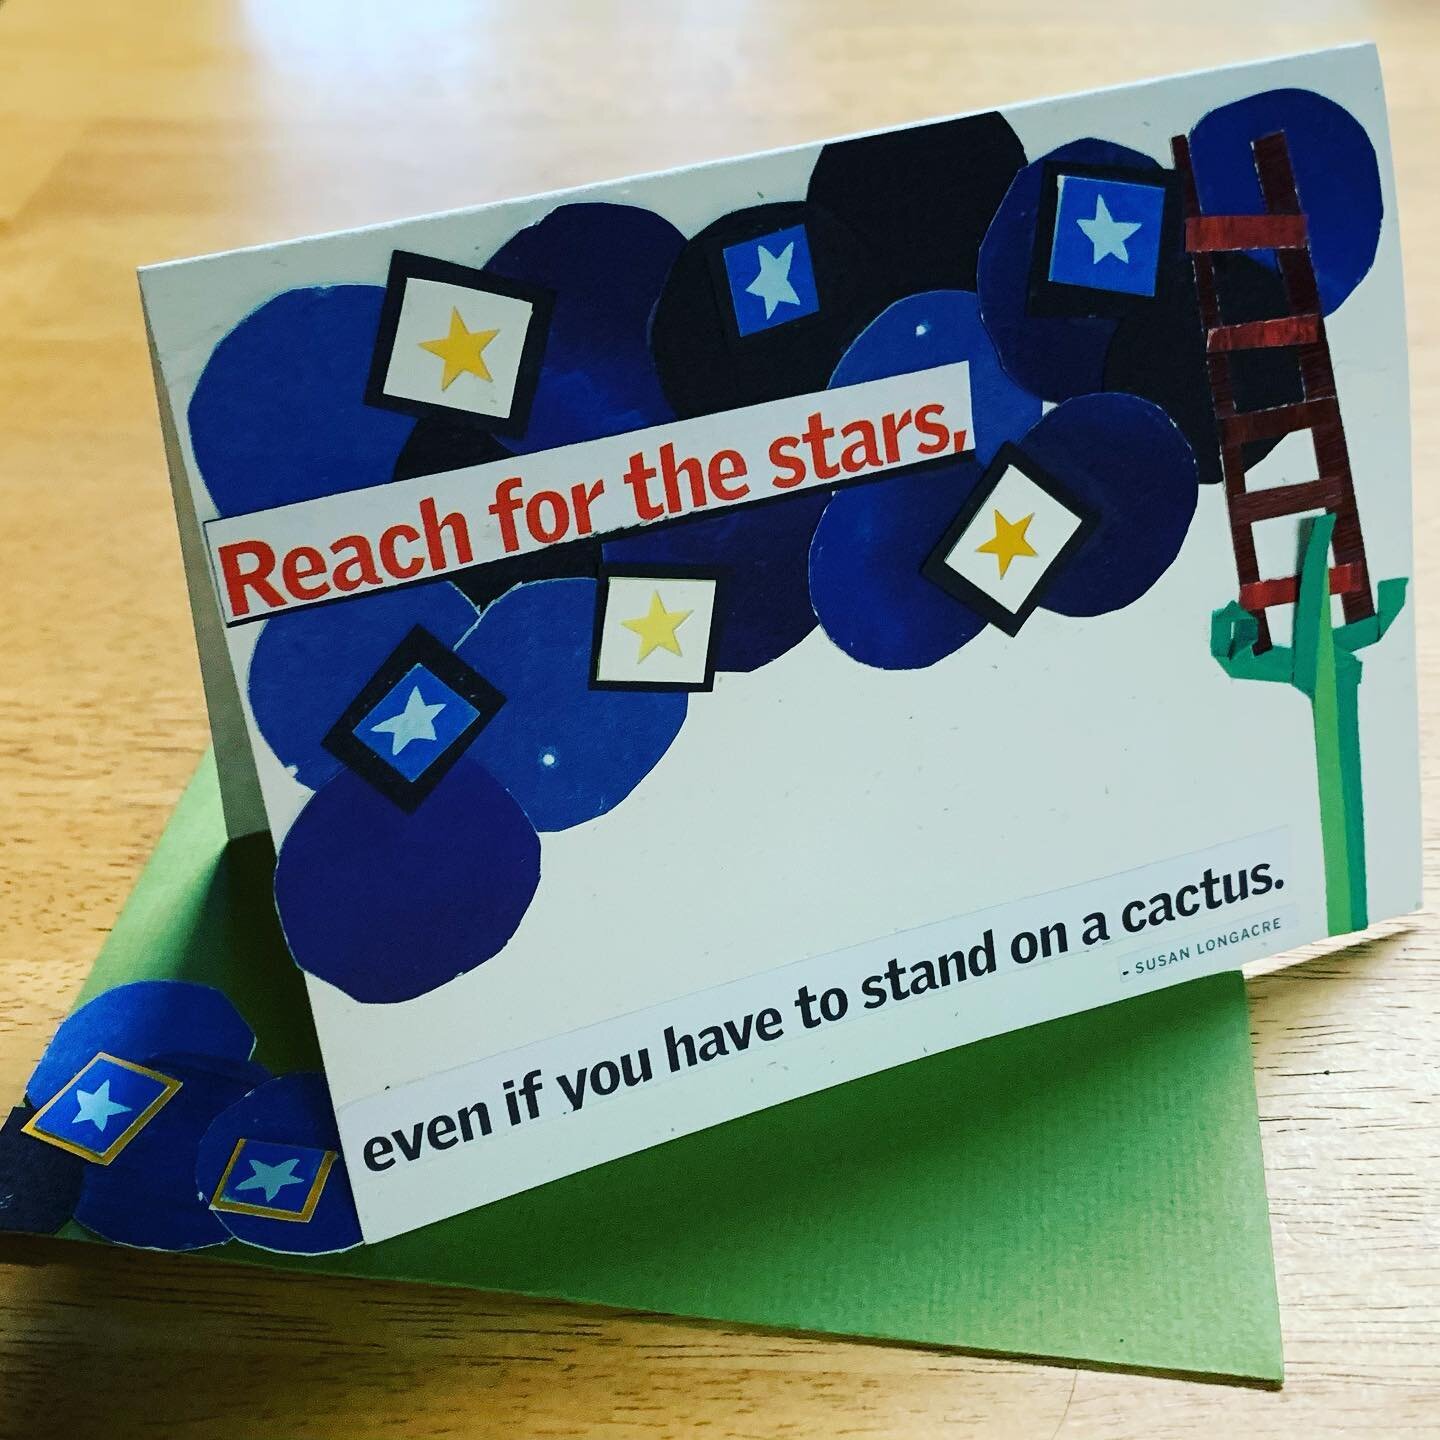 #reachforthestars even if you have to stand on a #cactus